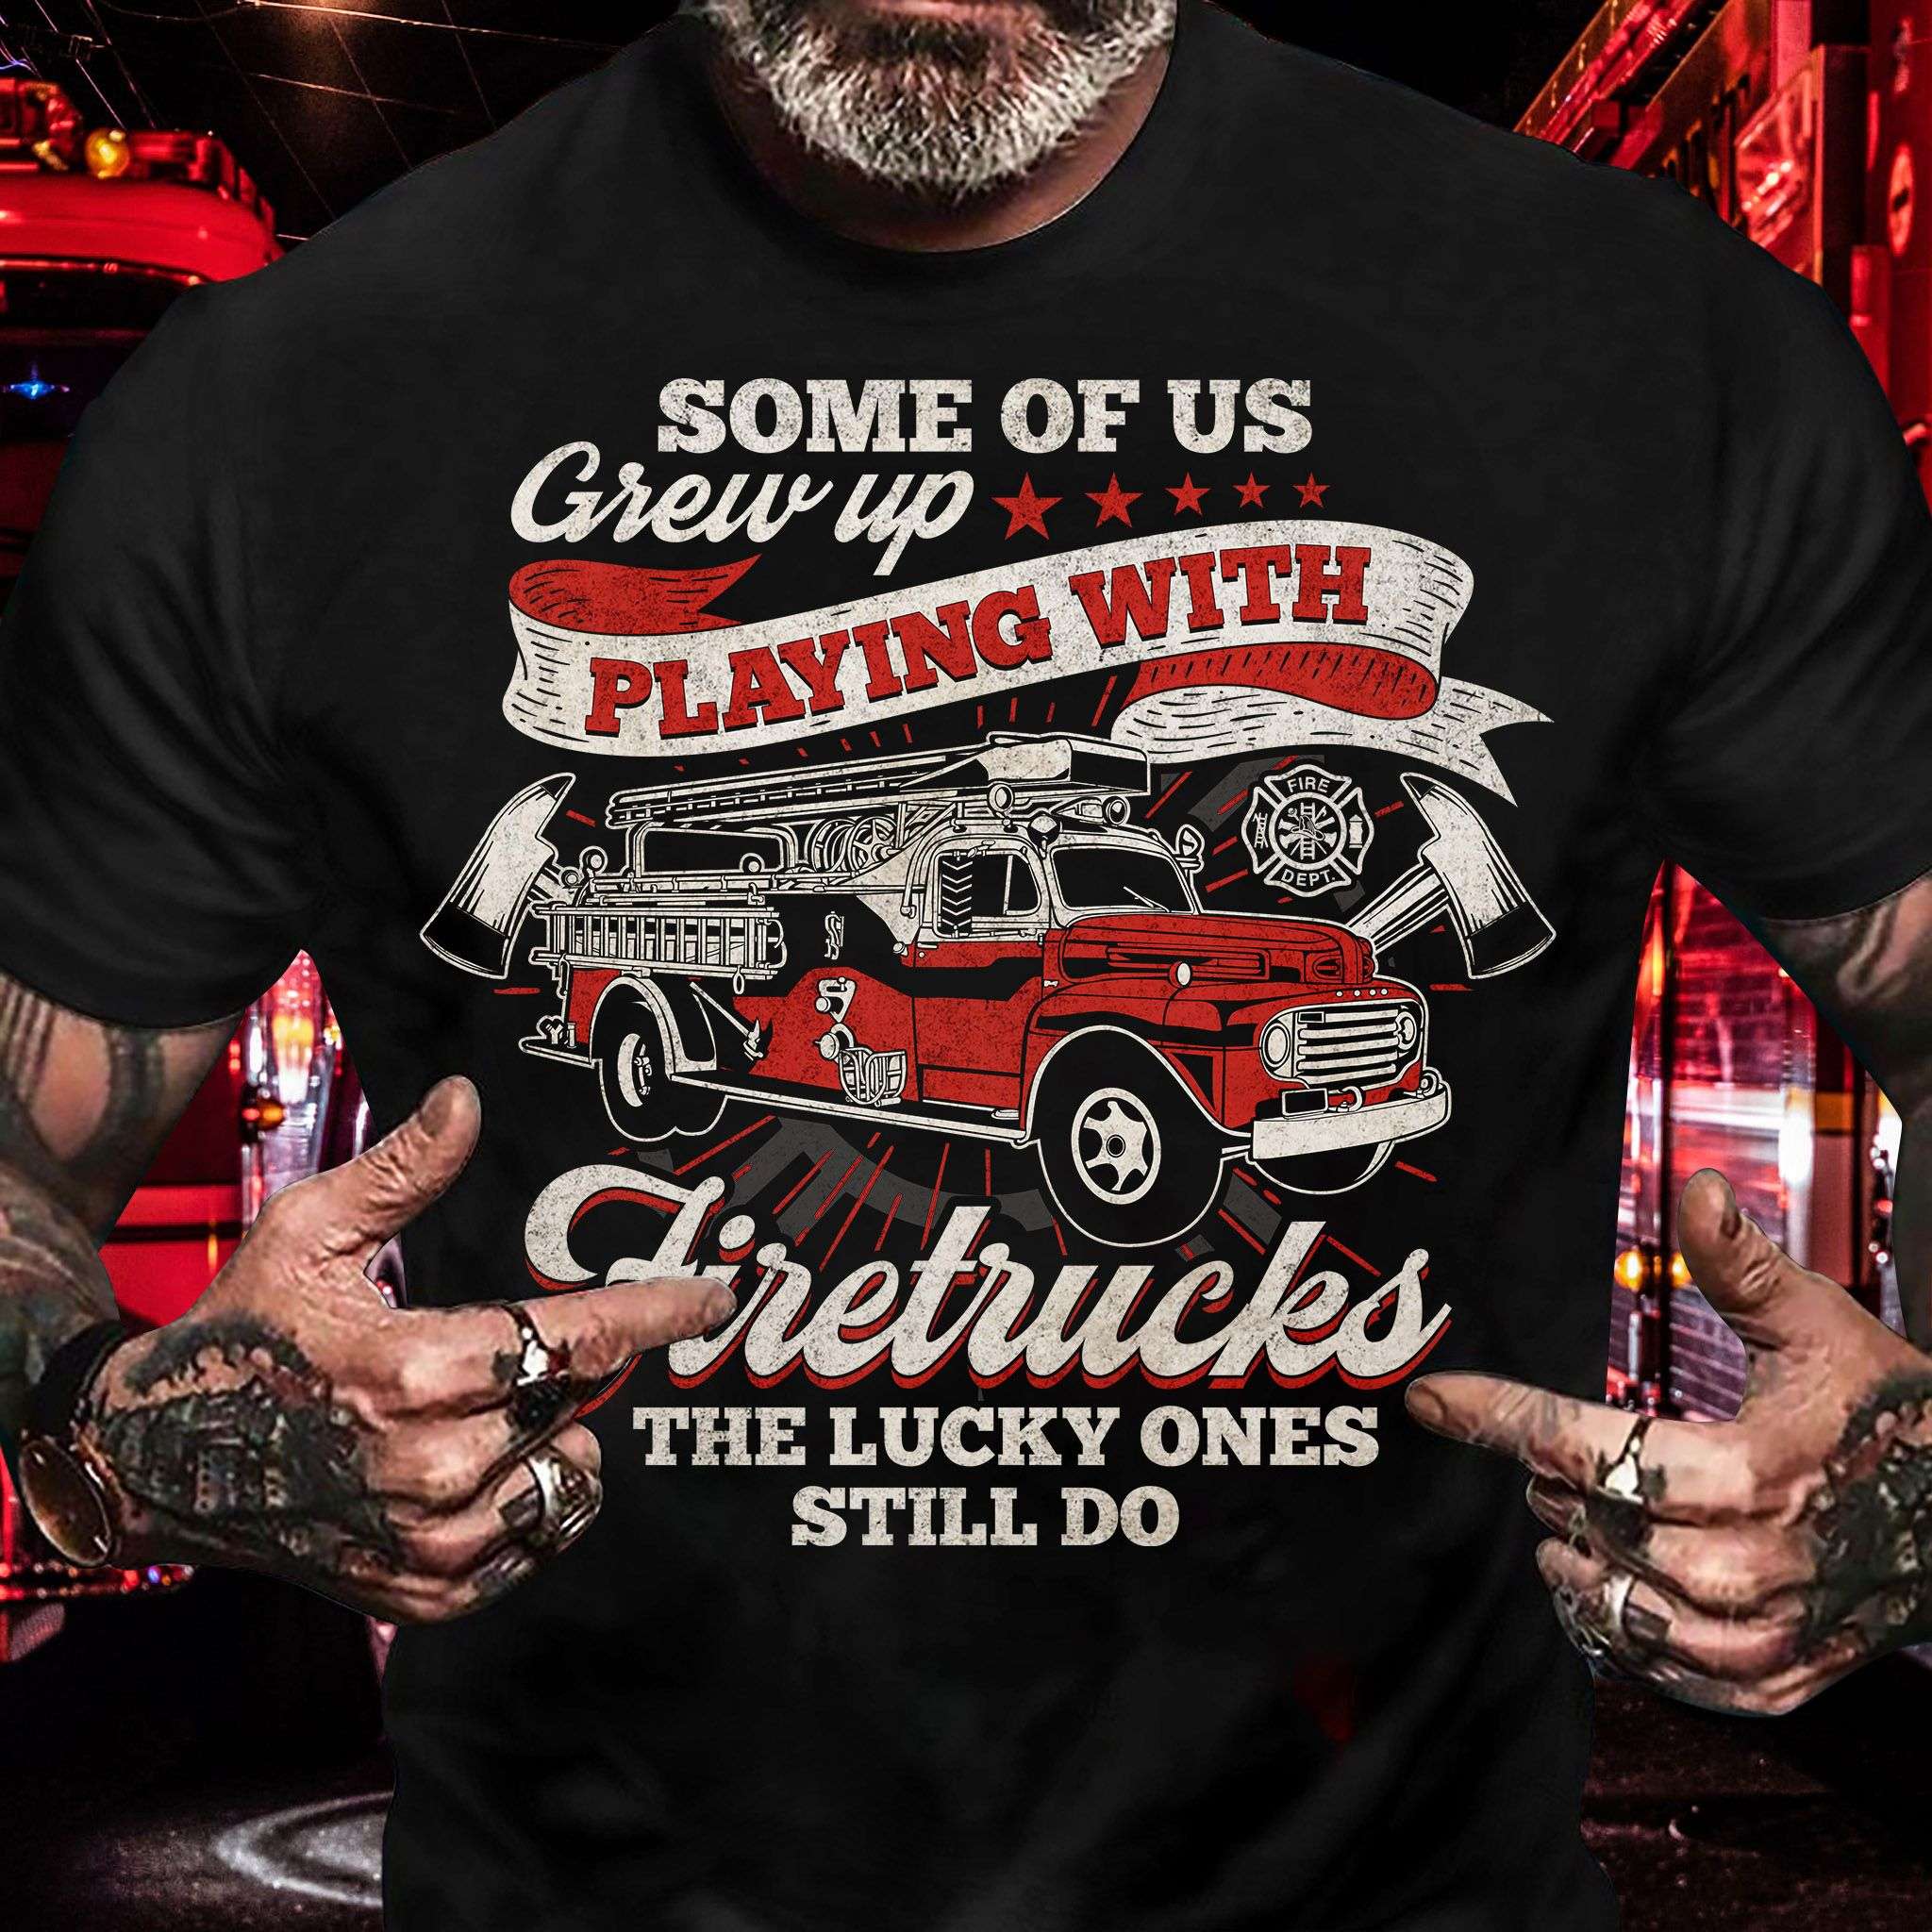 Some of us grew up playing with firetrucks - Firefighter the job, firetrucks driver